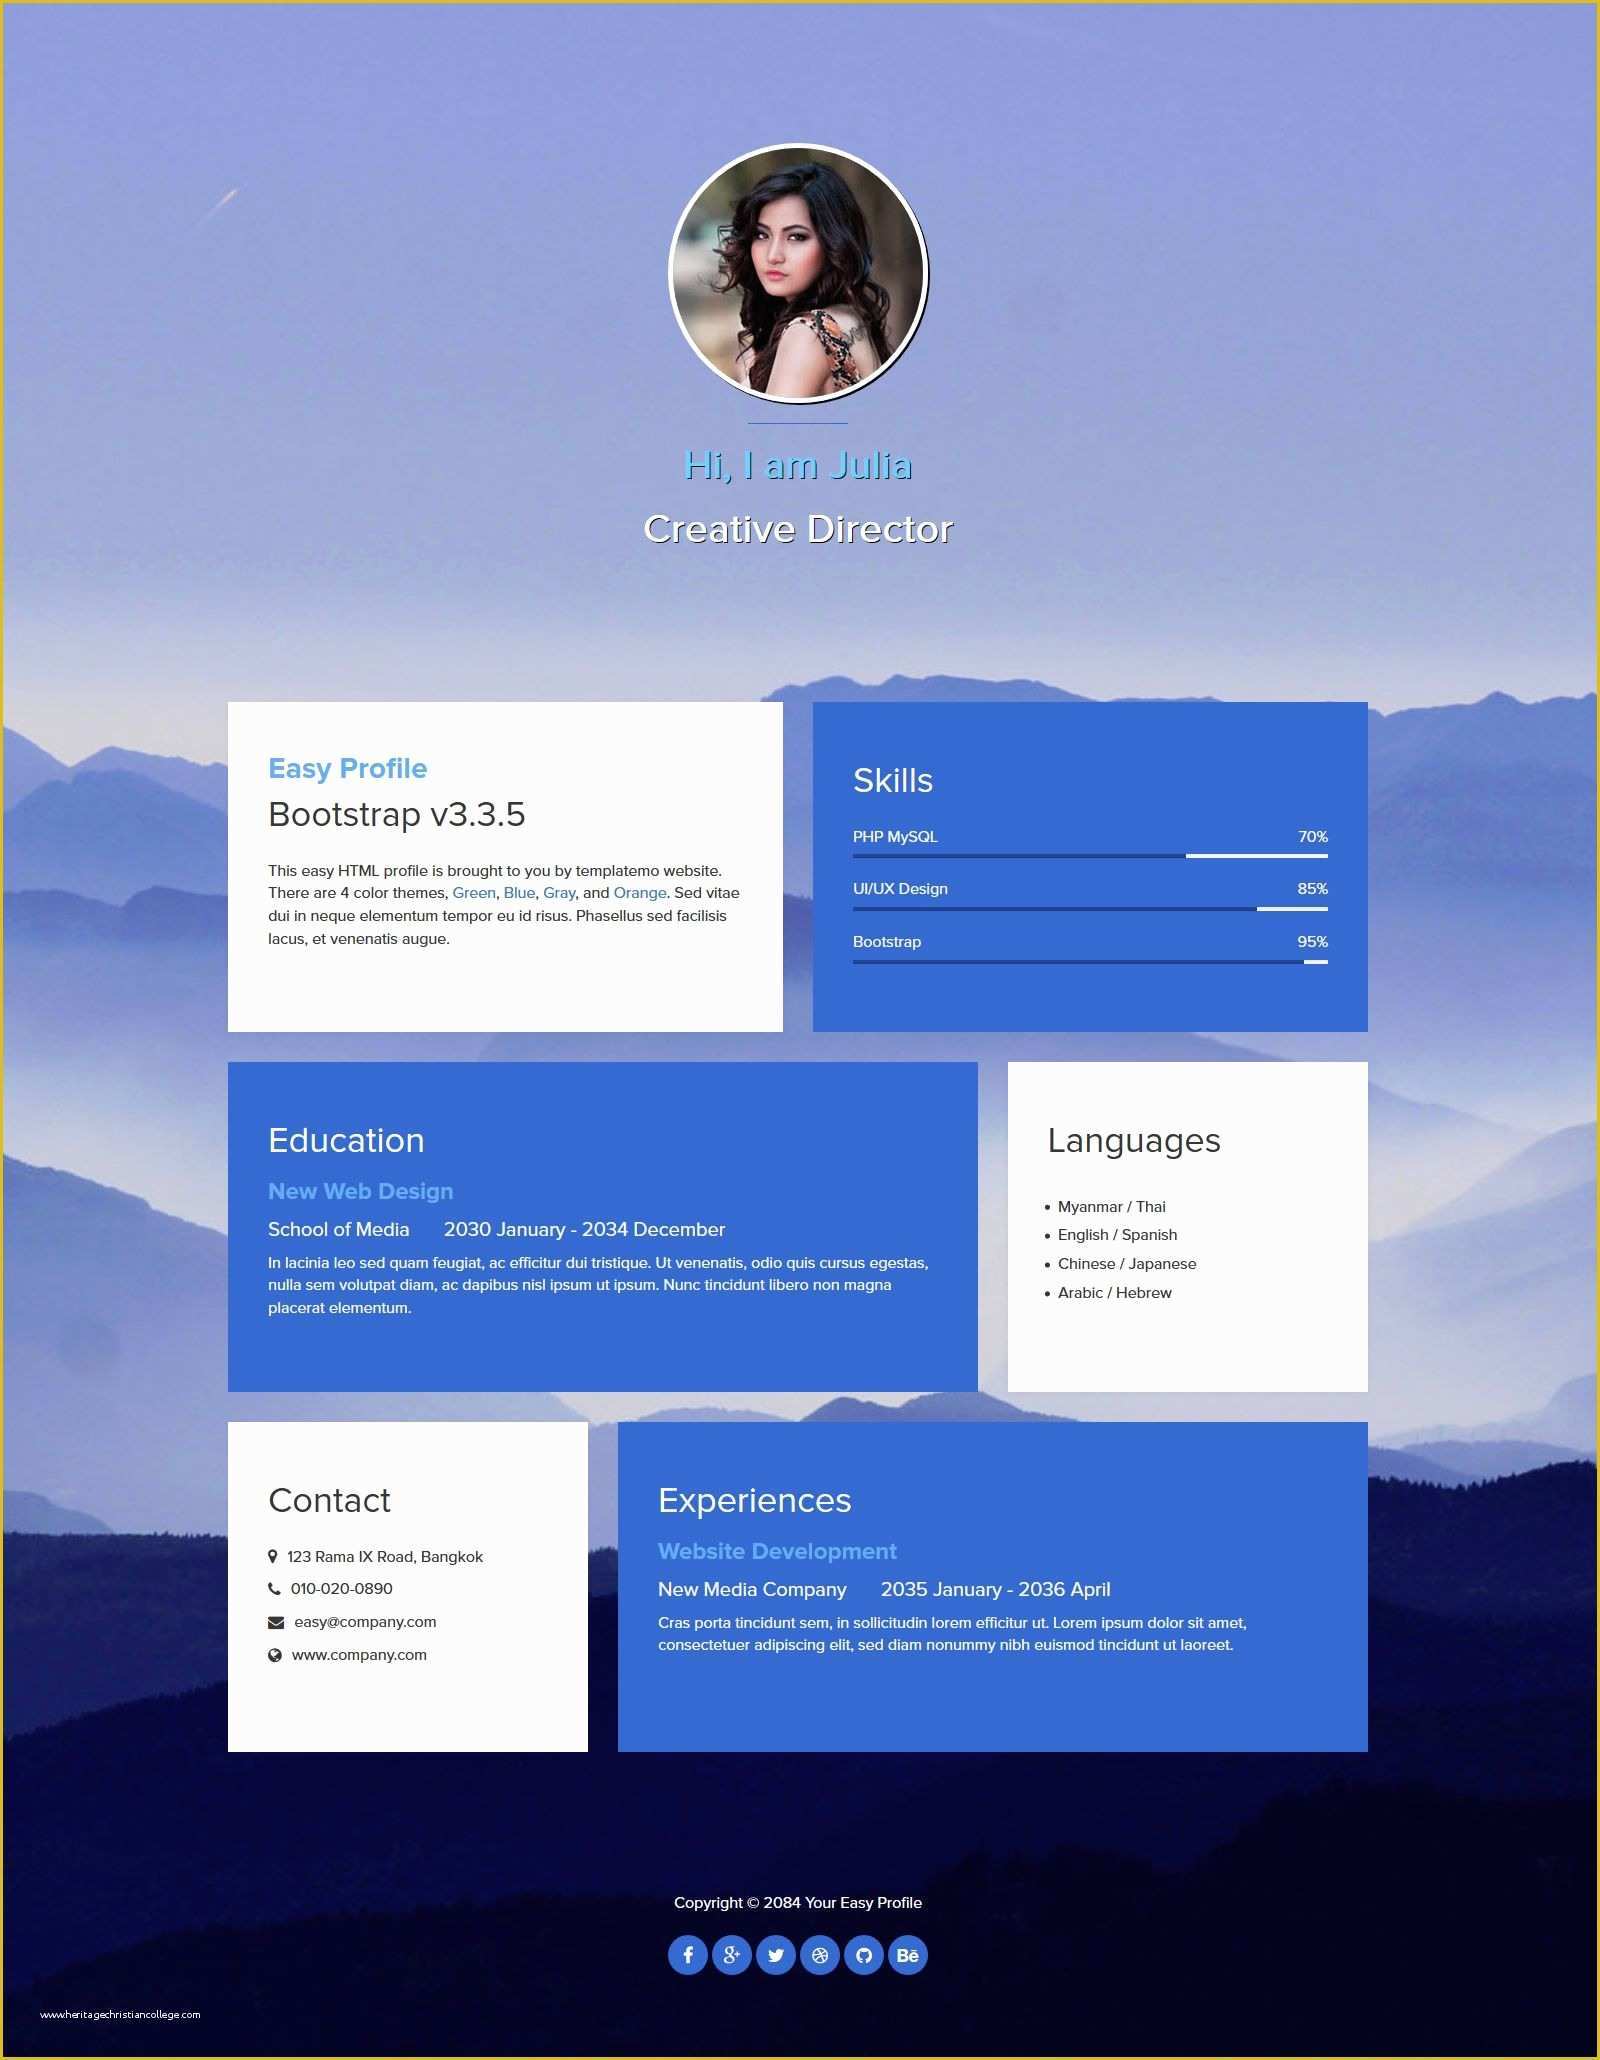 User Profile Website Template Free Of Easy Profile is One Page Bootstrap V3 3 5 Layout Fade In